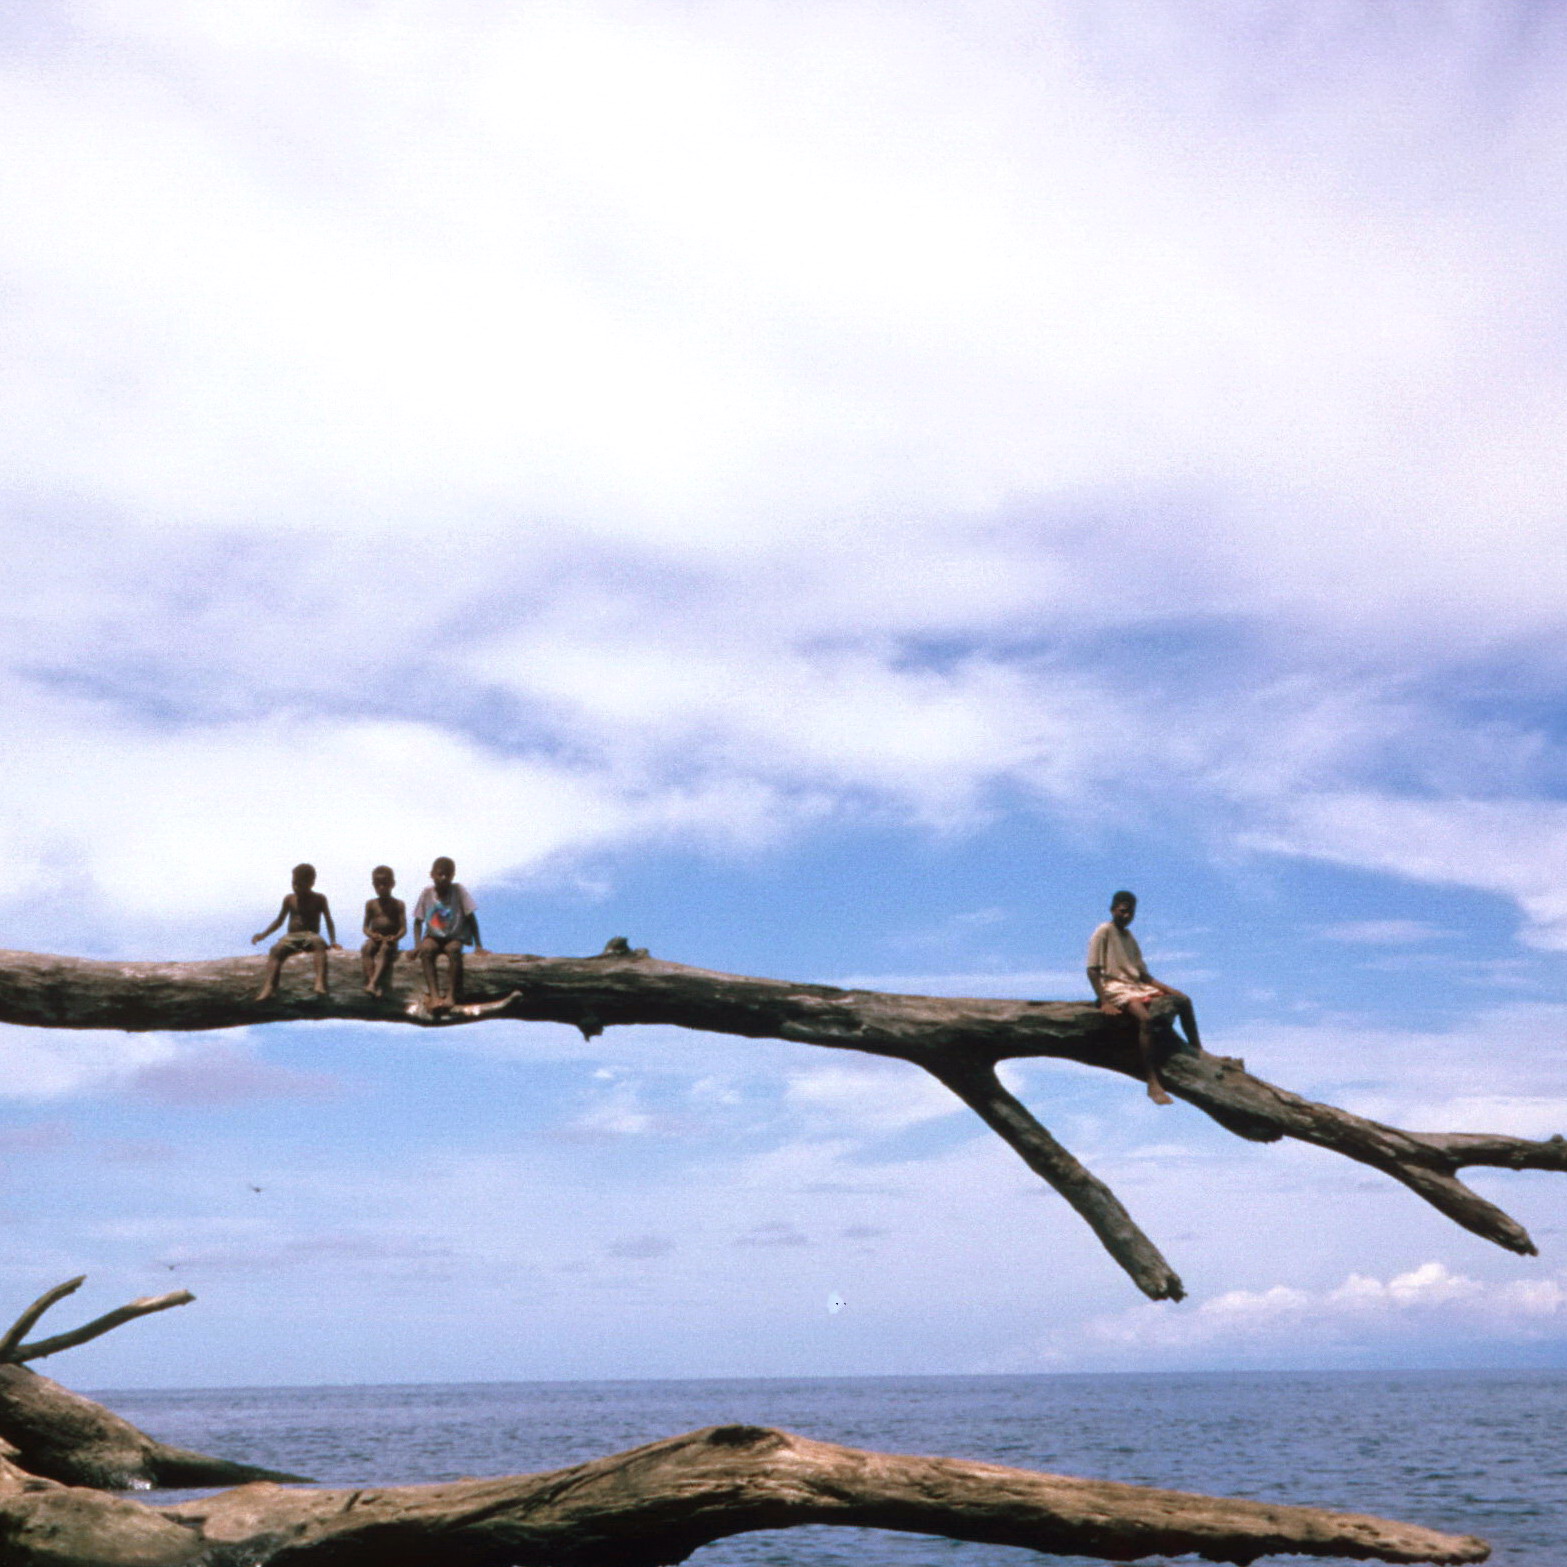 Kids Sitting on Tree Limb over Ocean, Oceanic Art from the South Pacific in Context